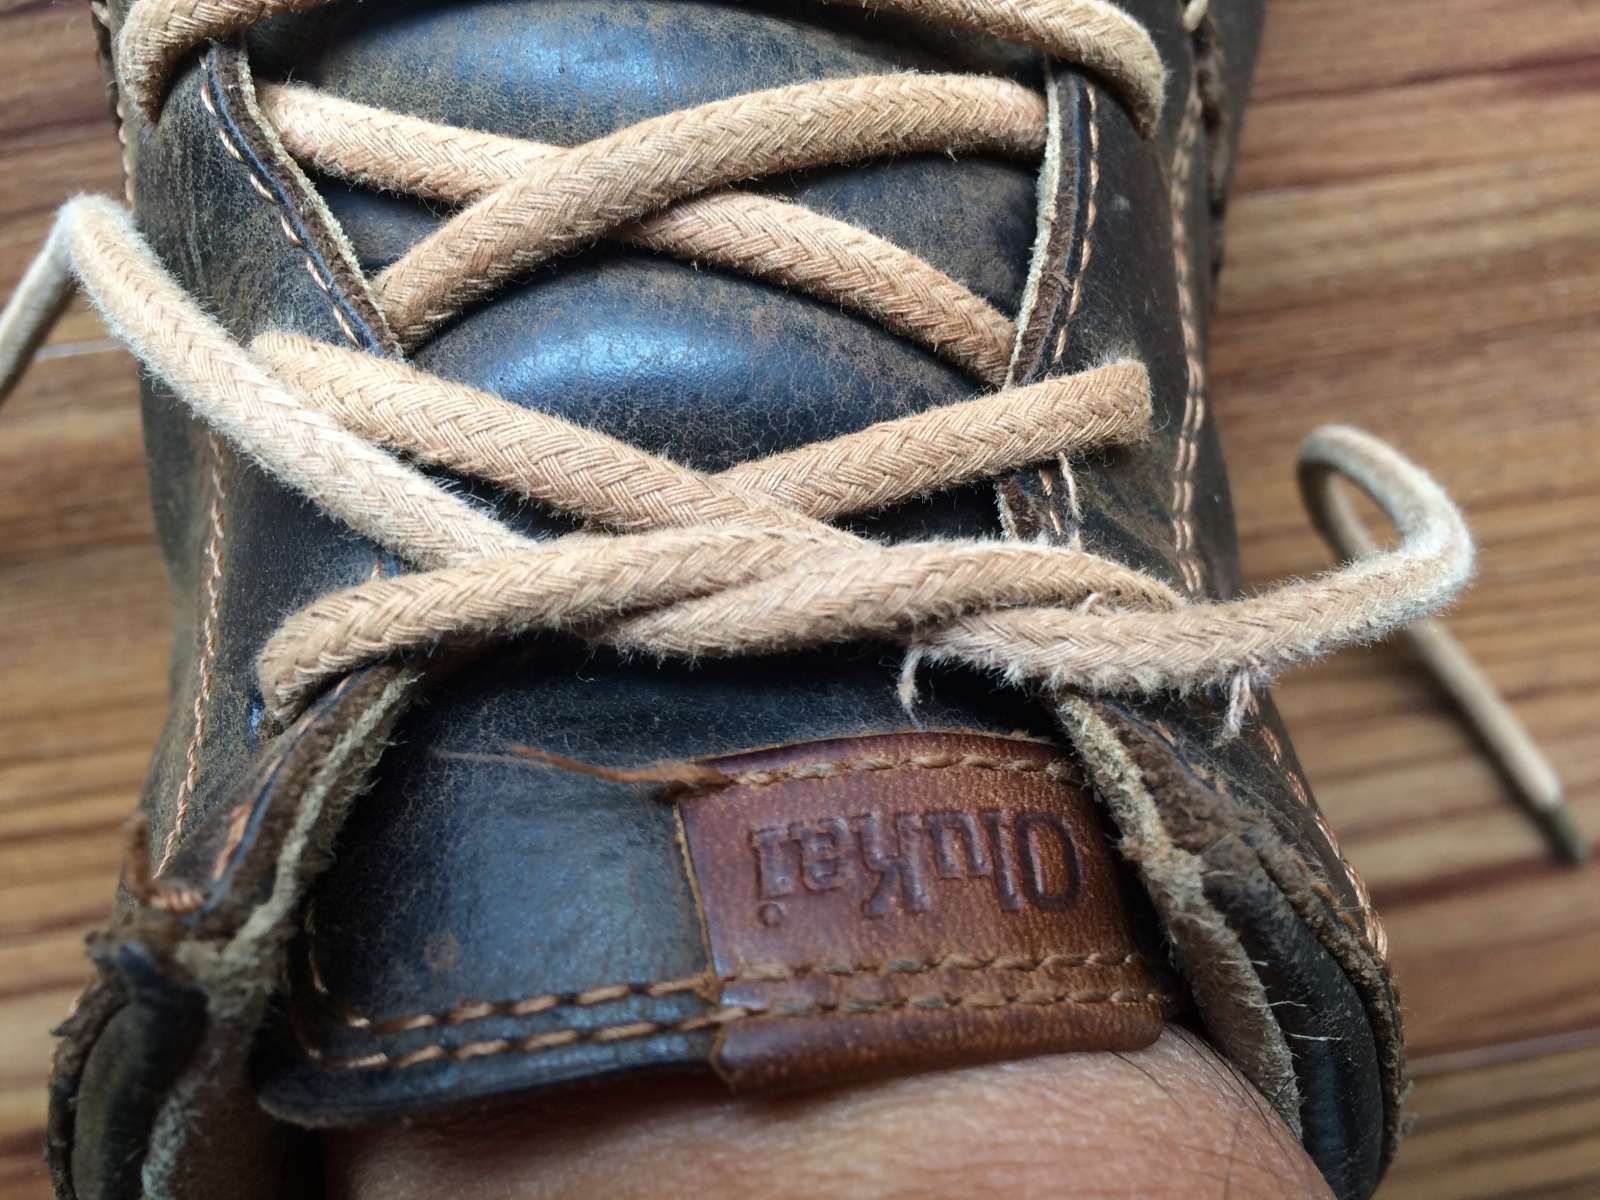 The Right Way to Tie Your Shoes | Page 2 | Survival Monkey Forums